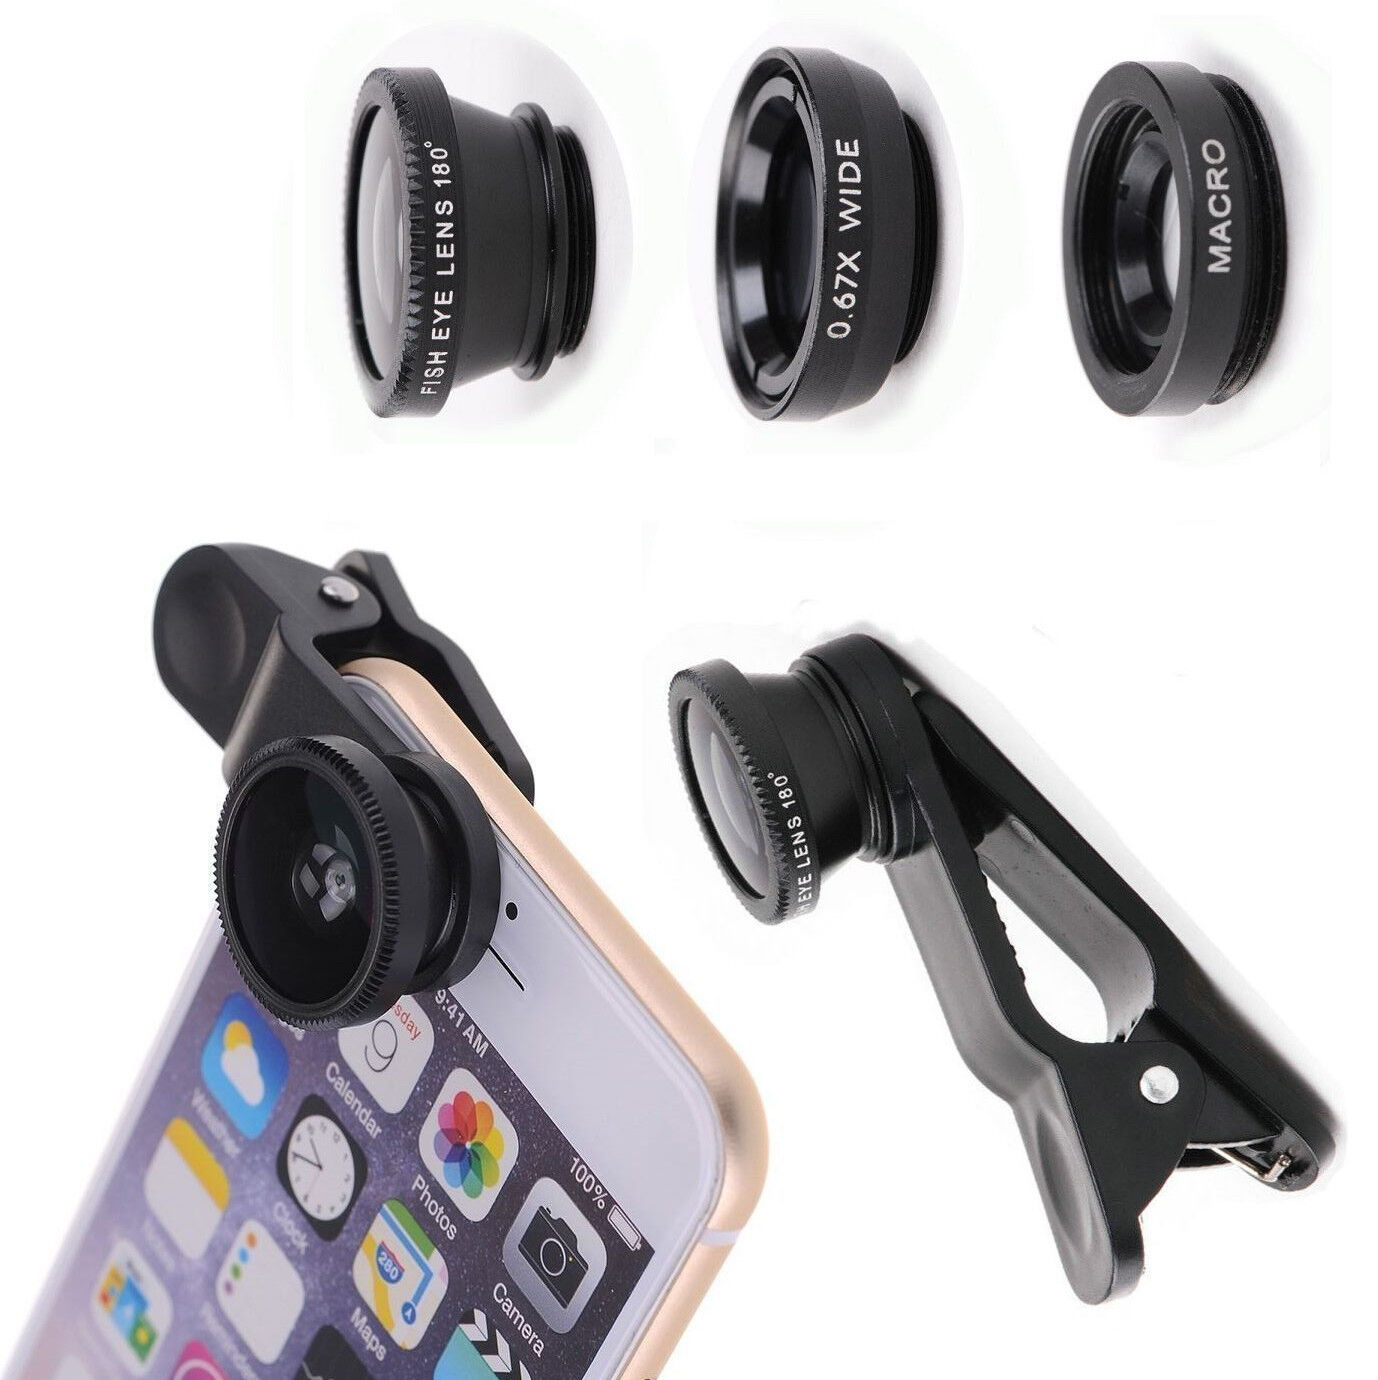 3 in1 Fish Eye Wide Angle Macro Telephoto Lens Camera for iPhone 6 PLUS 5 5S 5C